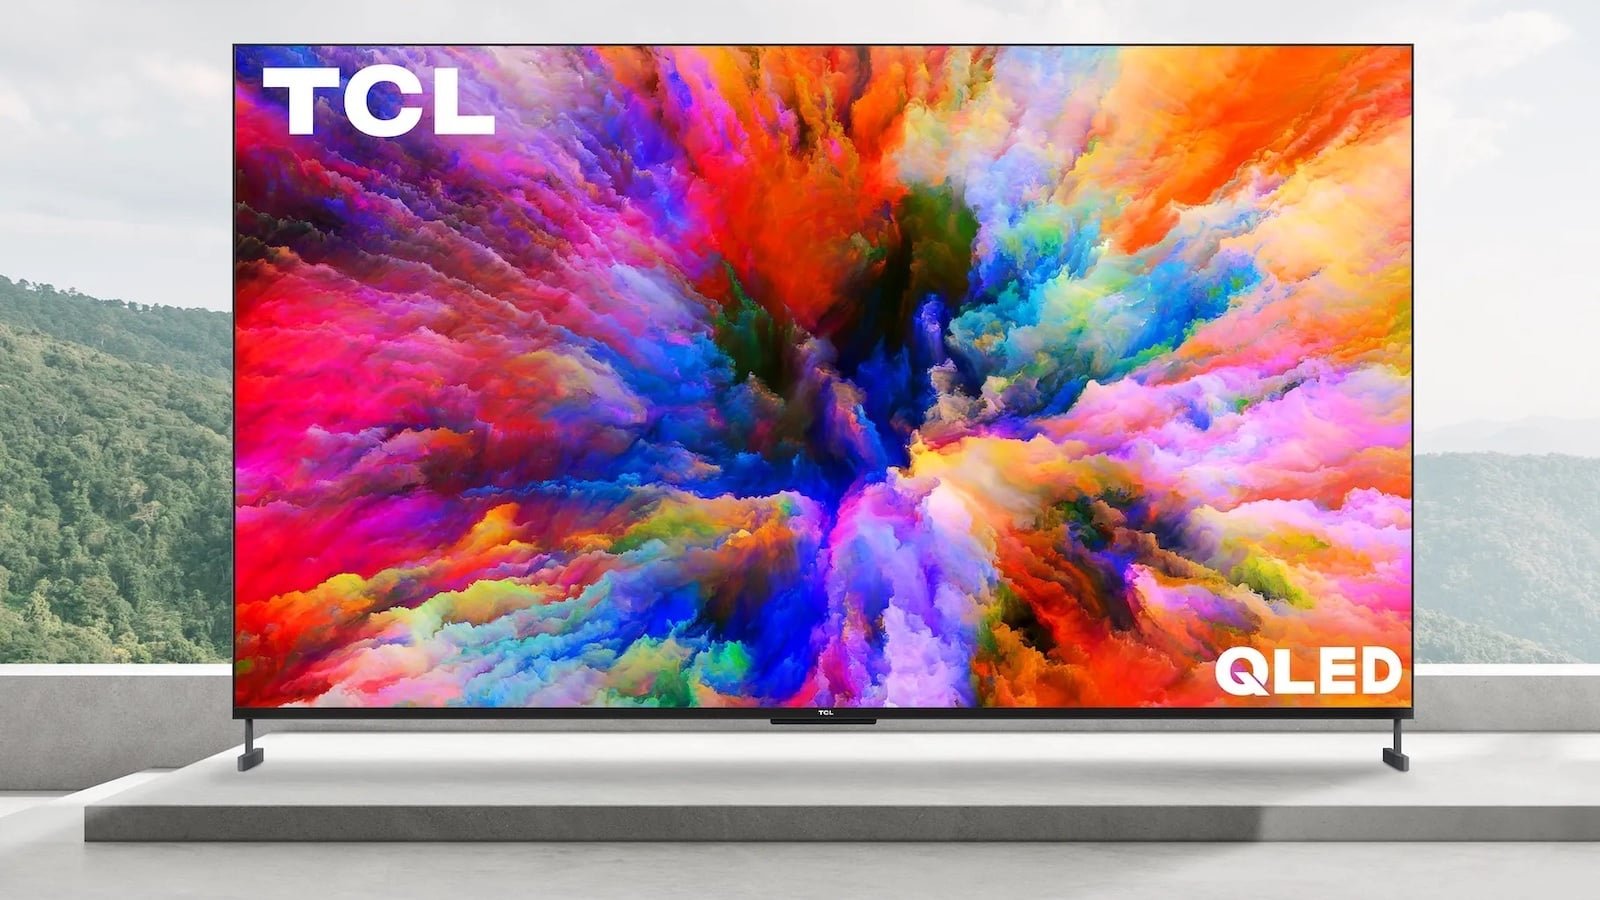 TCL 98″ Class XL Collection 4K UHD QLED TV gives you cinematic picture quality at home